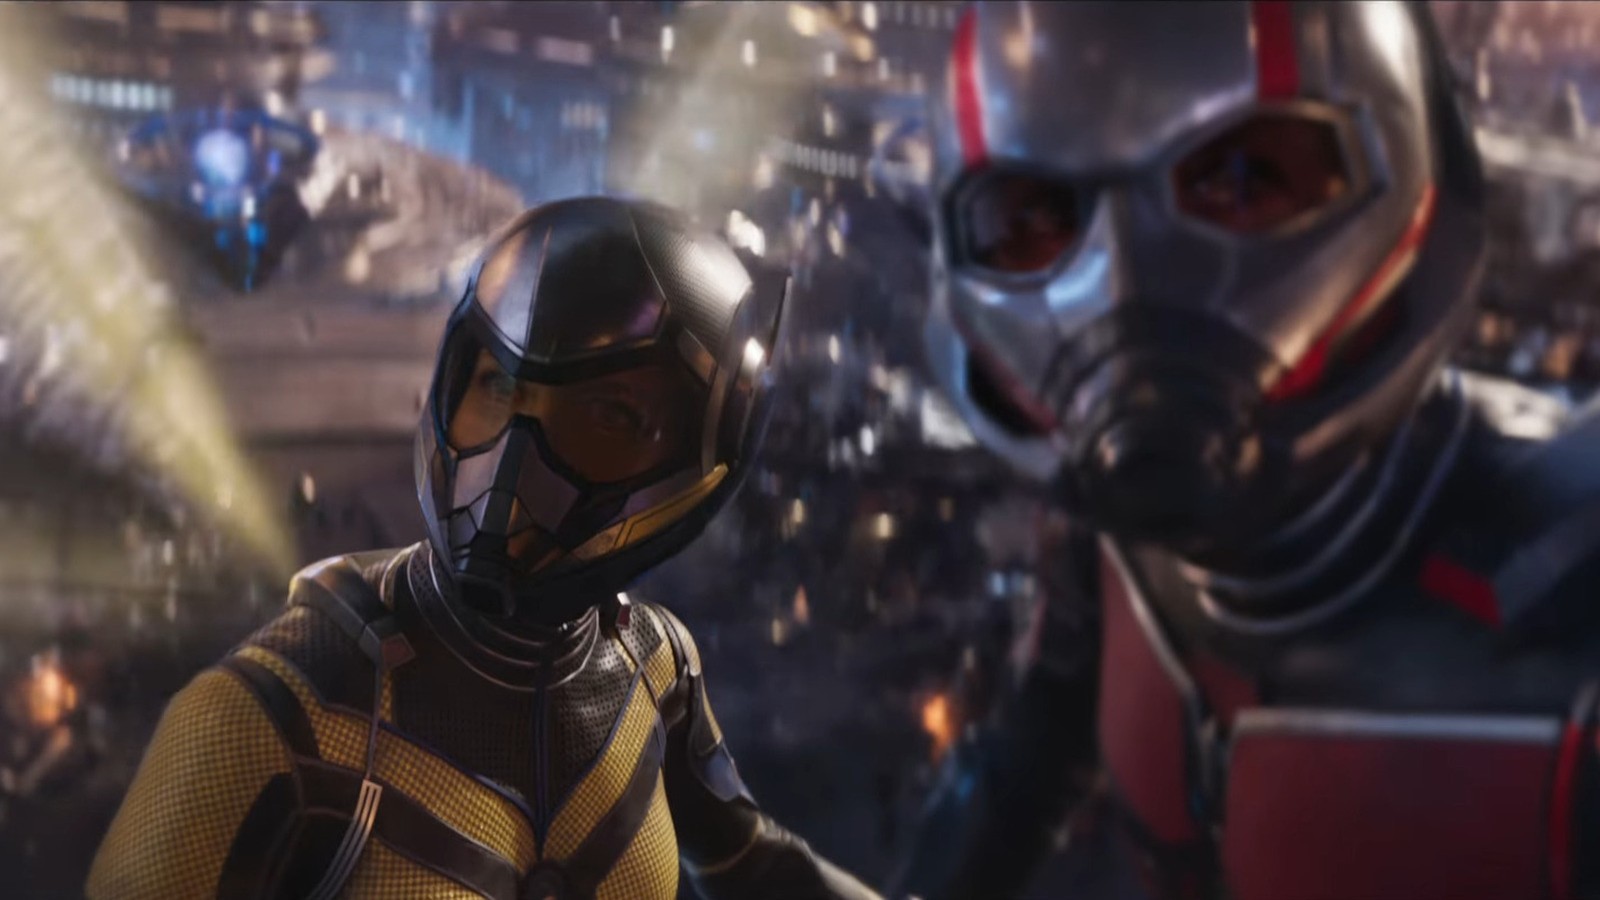 Ant-Man and The Wasp: Quantumania review: The least bland Marvel